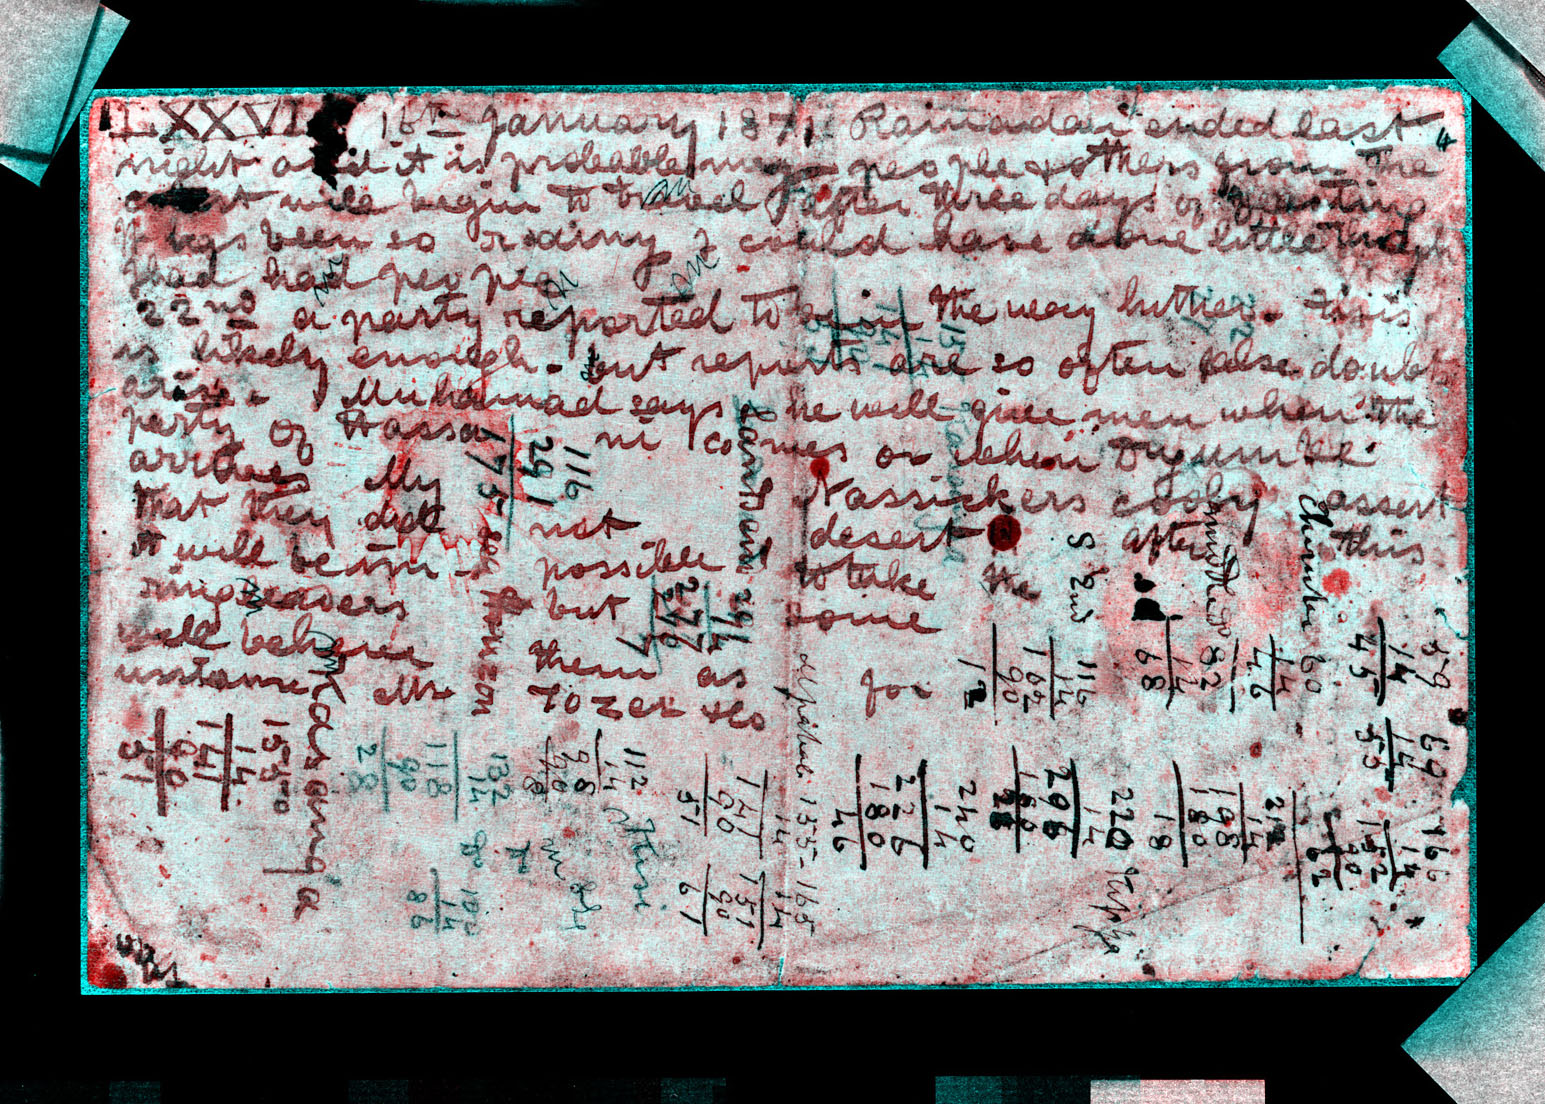 A spectral image of a page of the 1870 Field Diary (Livingstone 1871a:LXXVI [v.1] pseudo_v1), detail. Copyright David Livingstone Centre. Creative Commons Attribution-NonCommercial 3.0 Unported (https://creativecommons.org/licenses/by-nc/3.0/).